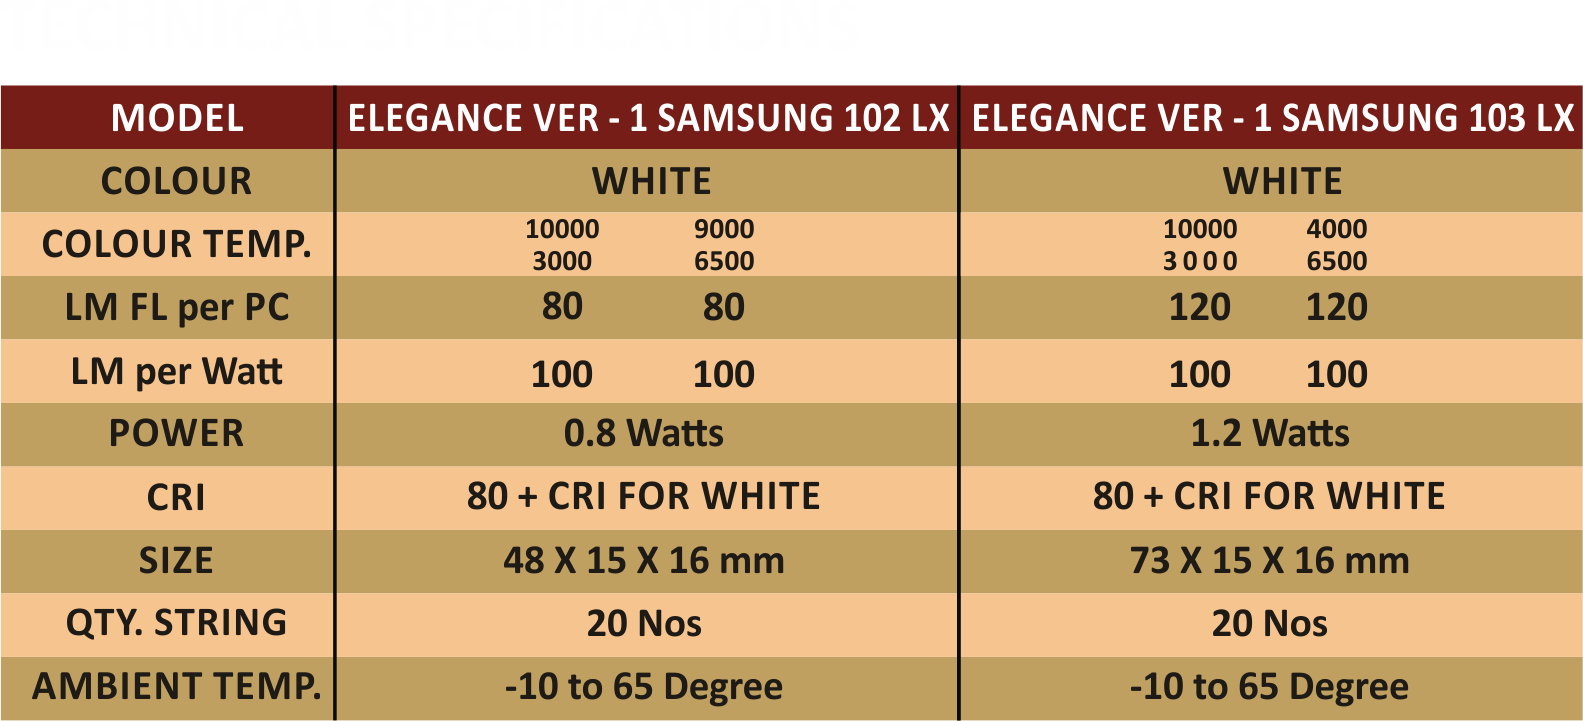 Specification/Features of Elegance